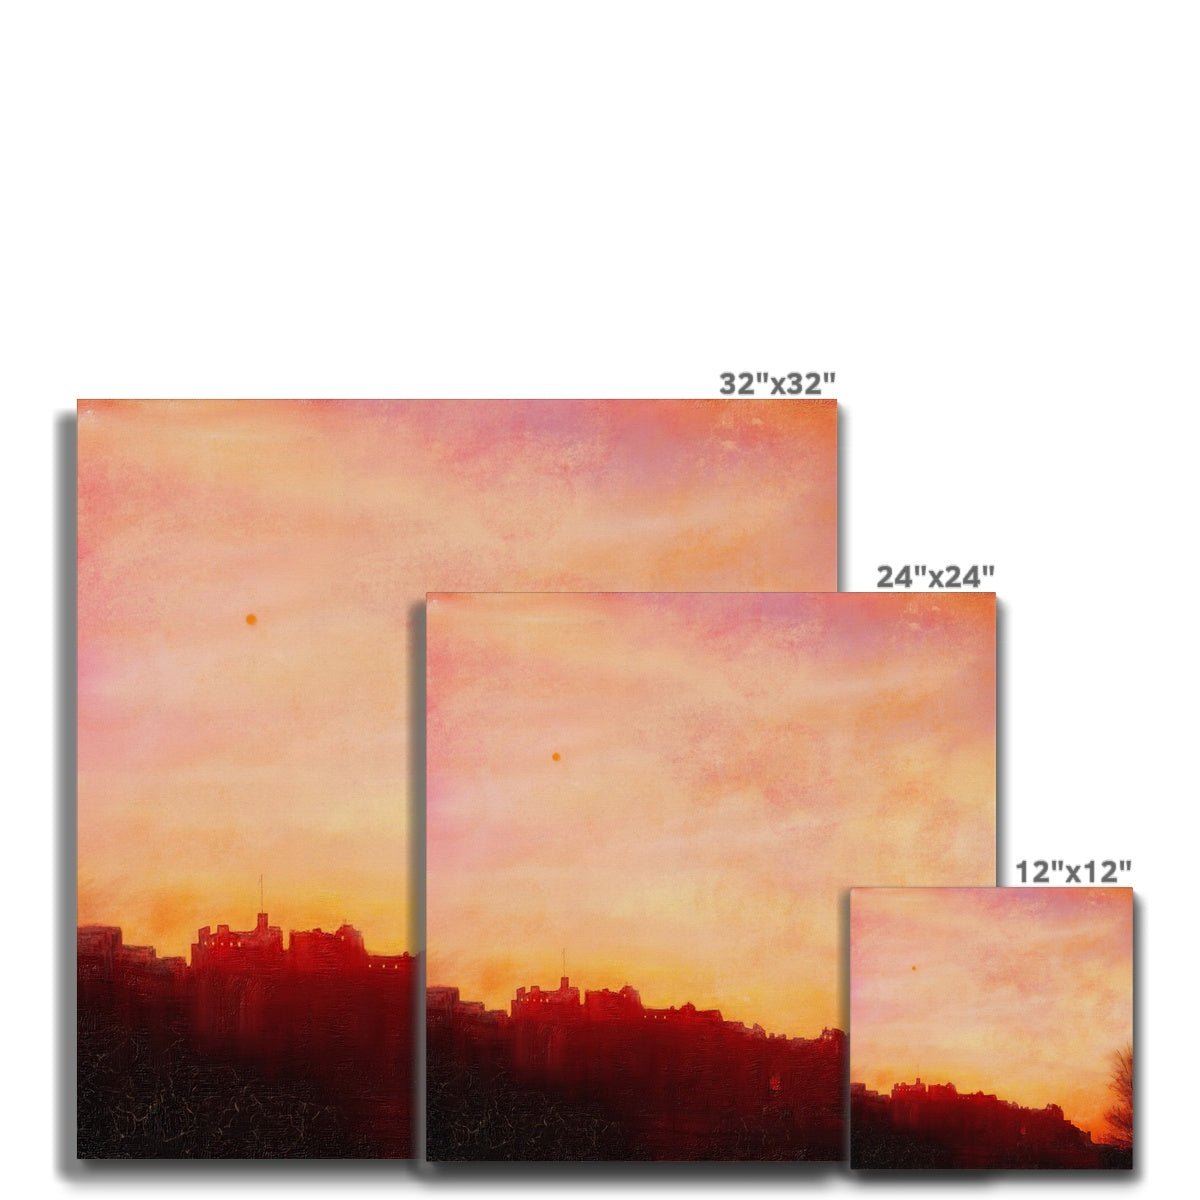 Edinburgh Castle Sunset Painting | Canvas From Scotland-Contemporary Stretched Canvas Prints-Historic & Iconic Scotland Art Gallery-Paintings, Prints, Homeware, Art Gifts From Scotland By Scottish Artist Kevin Hunter